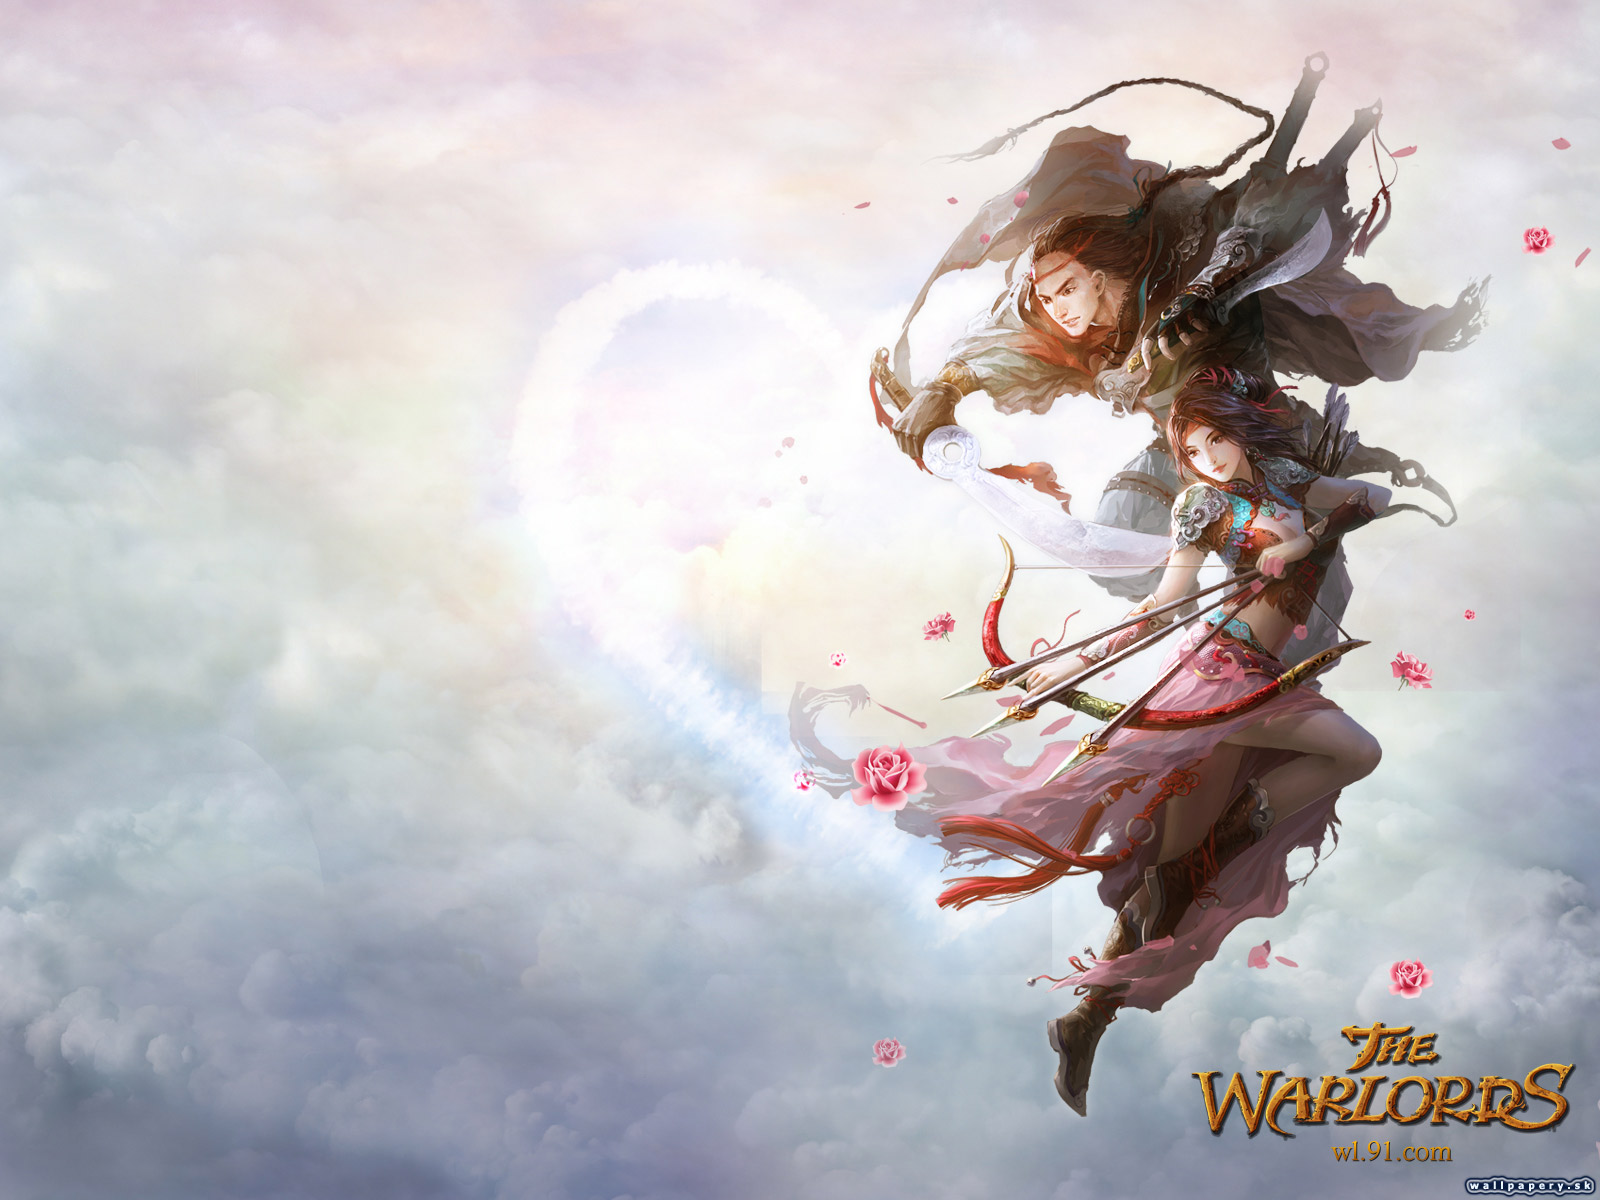 The Warlords - wallpaper 5